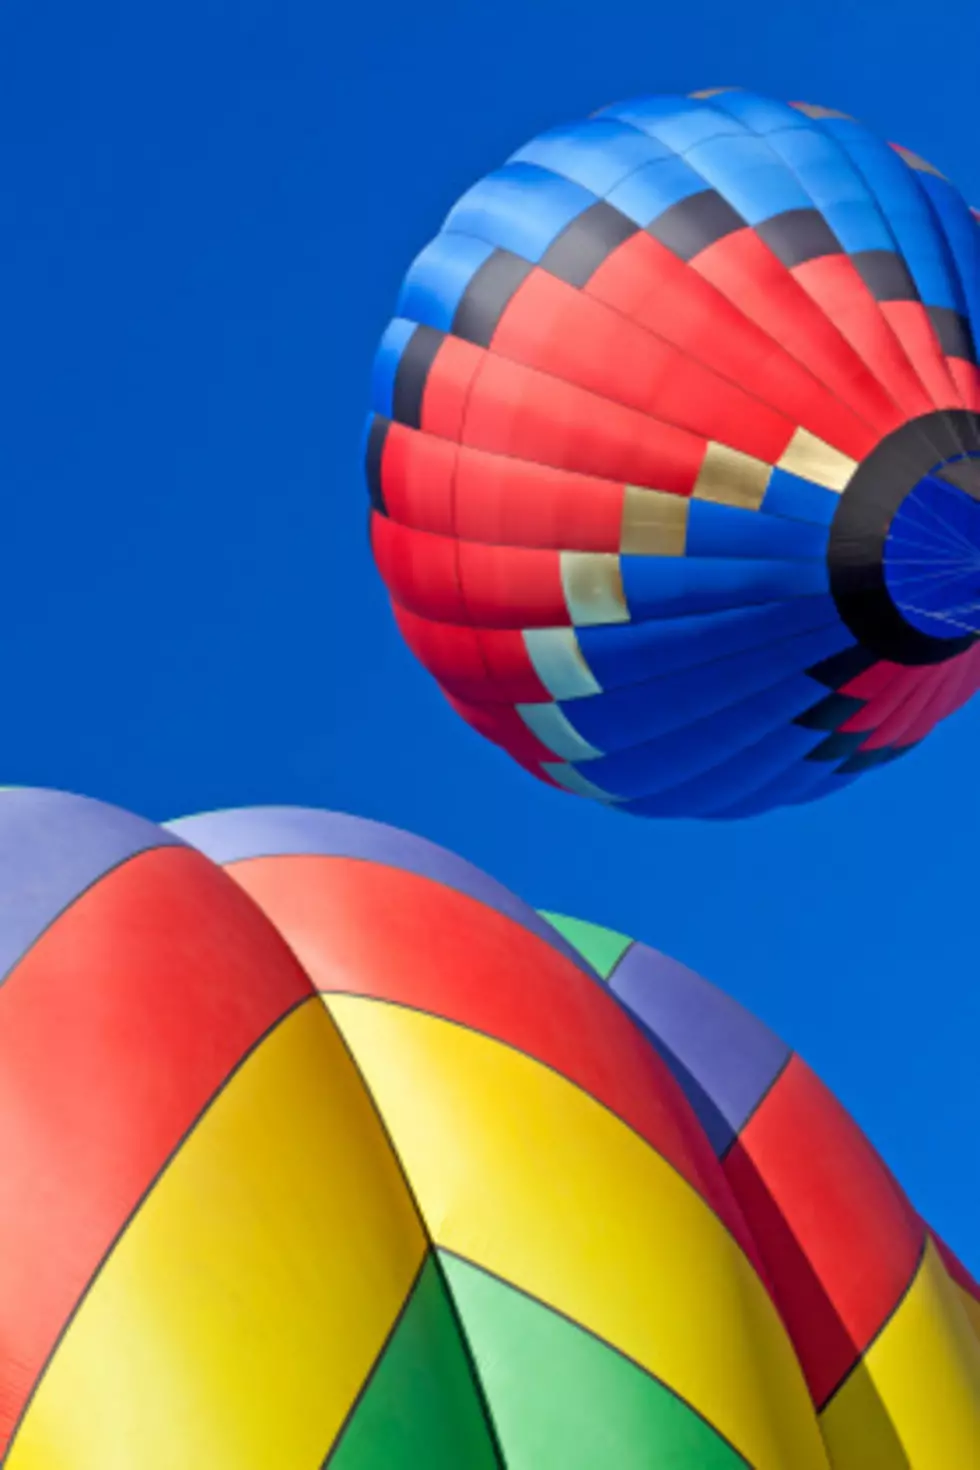 Wait – Saratoga Has a Balloon Festival? Where Have I Been?!